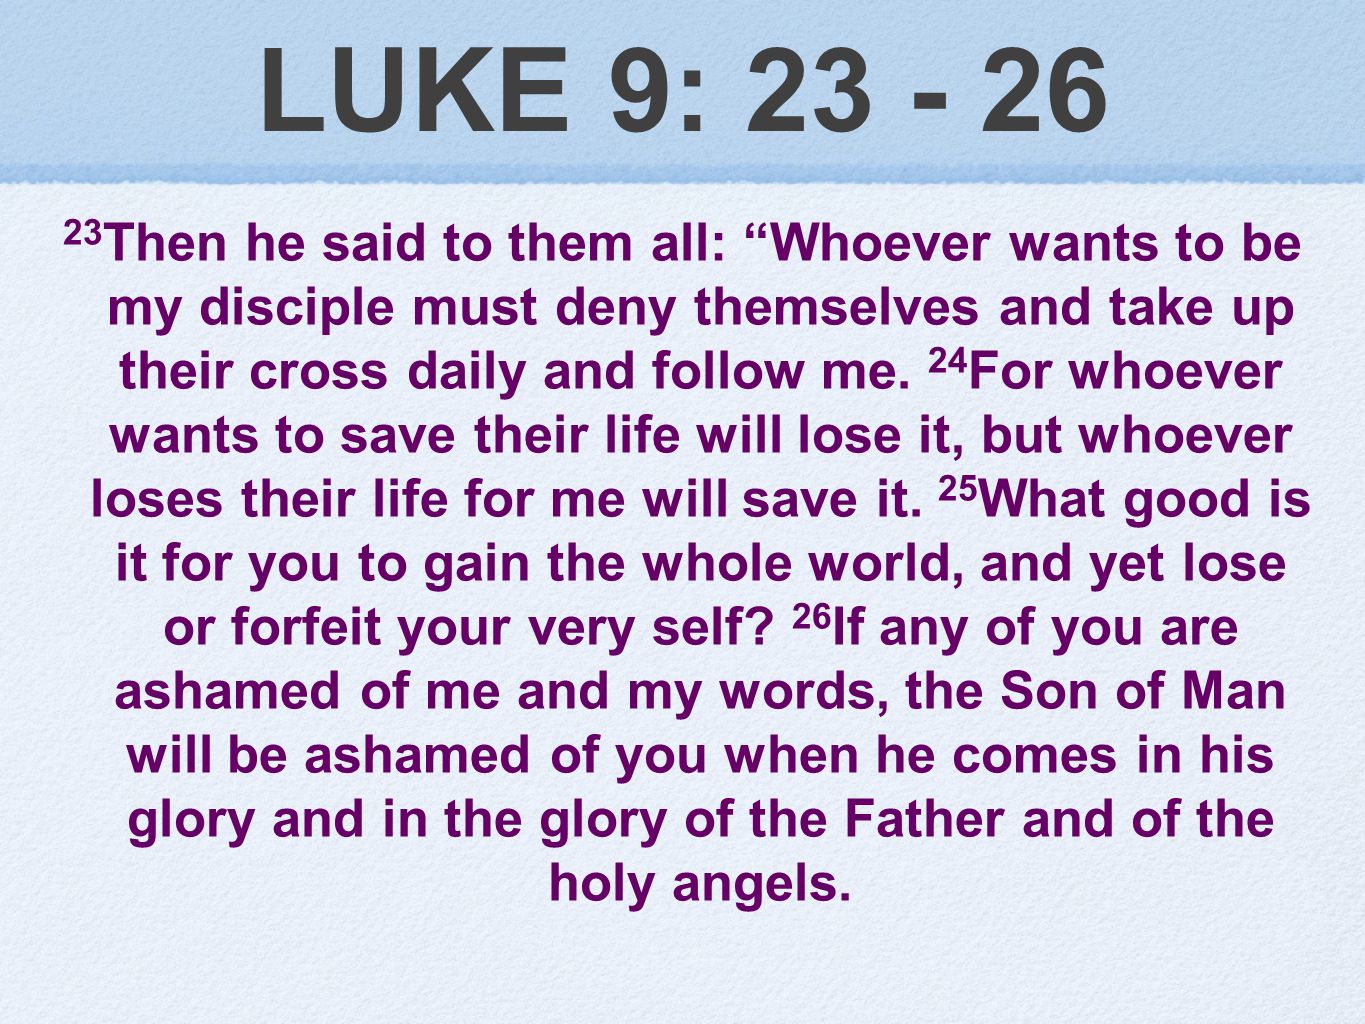 LUKE 9: Then he said to them all: Whoever wants to be my disciple must deny themselves and take up their cross daily and follow me.